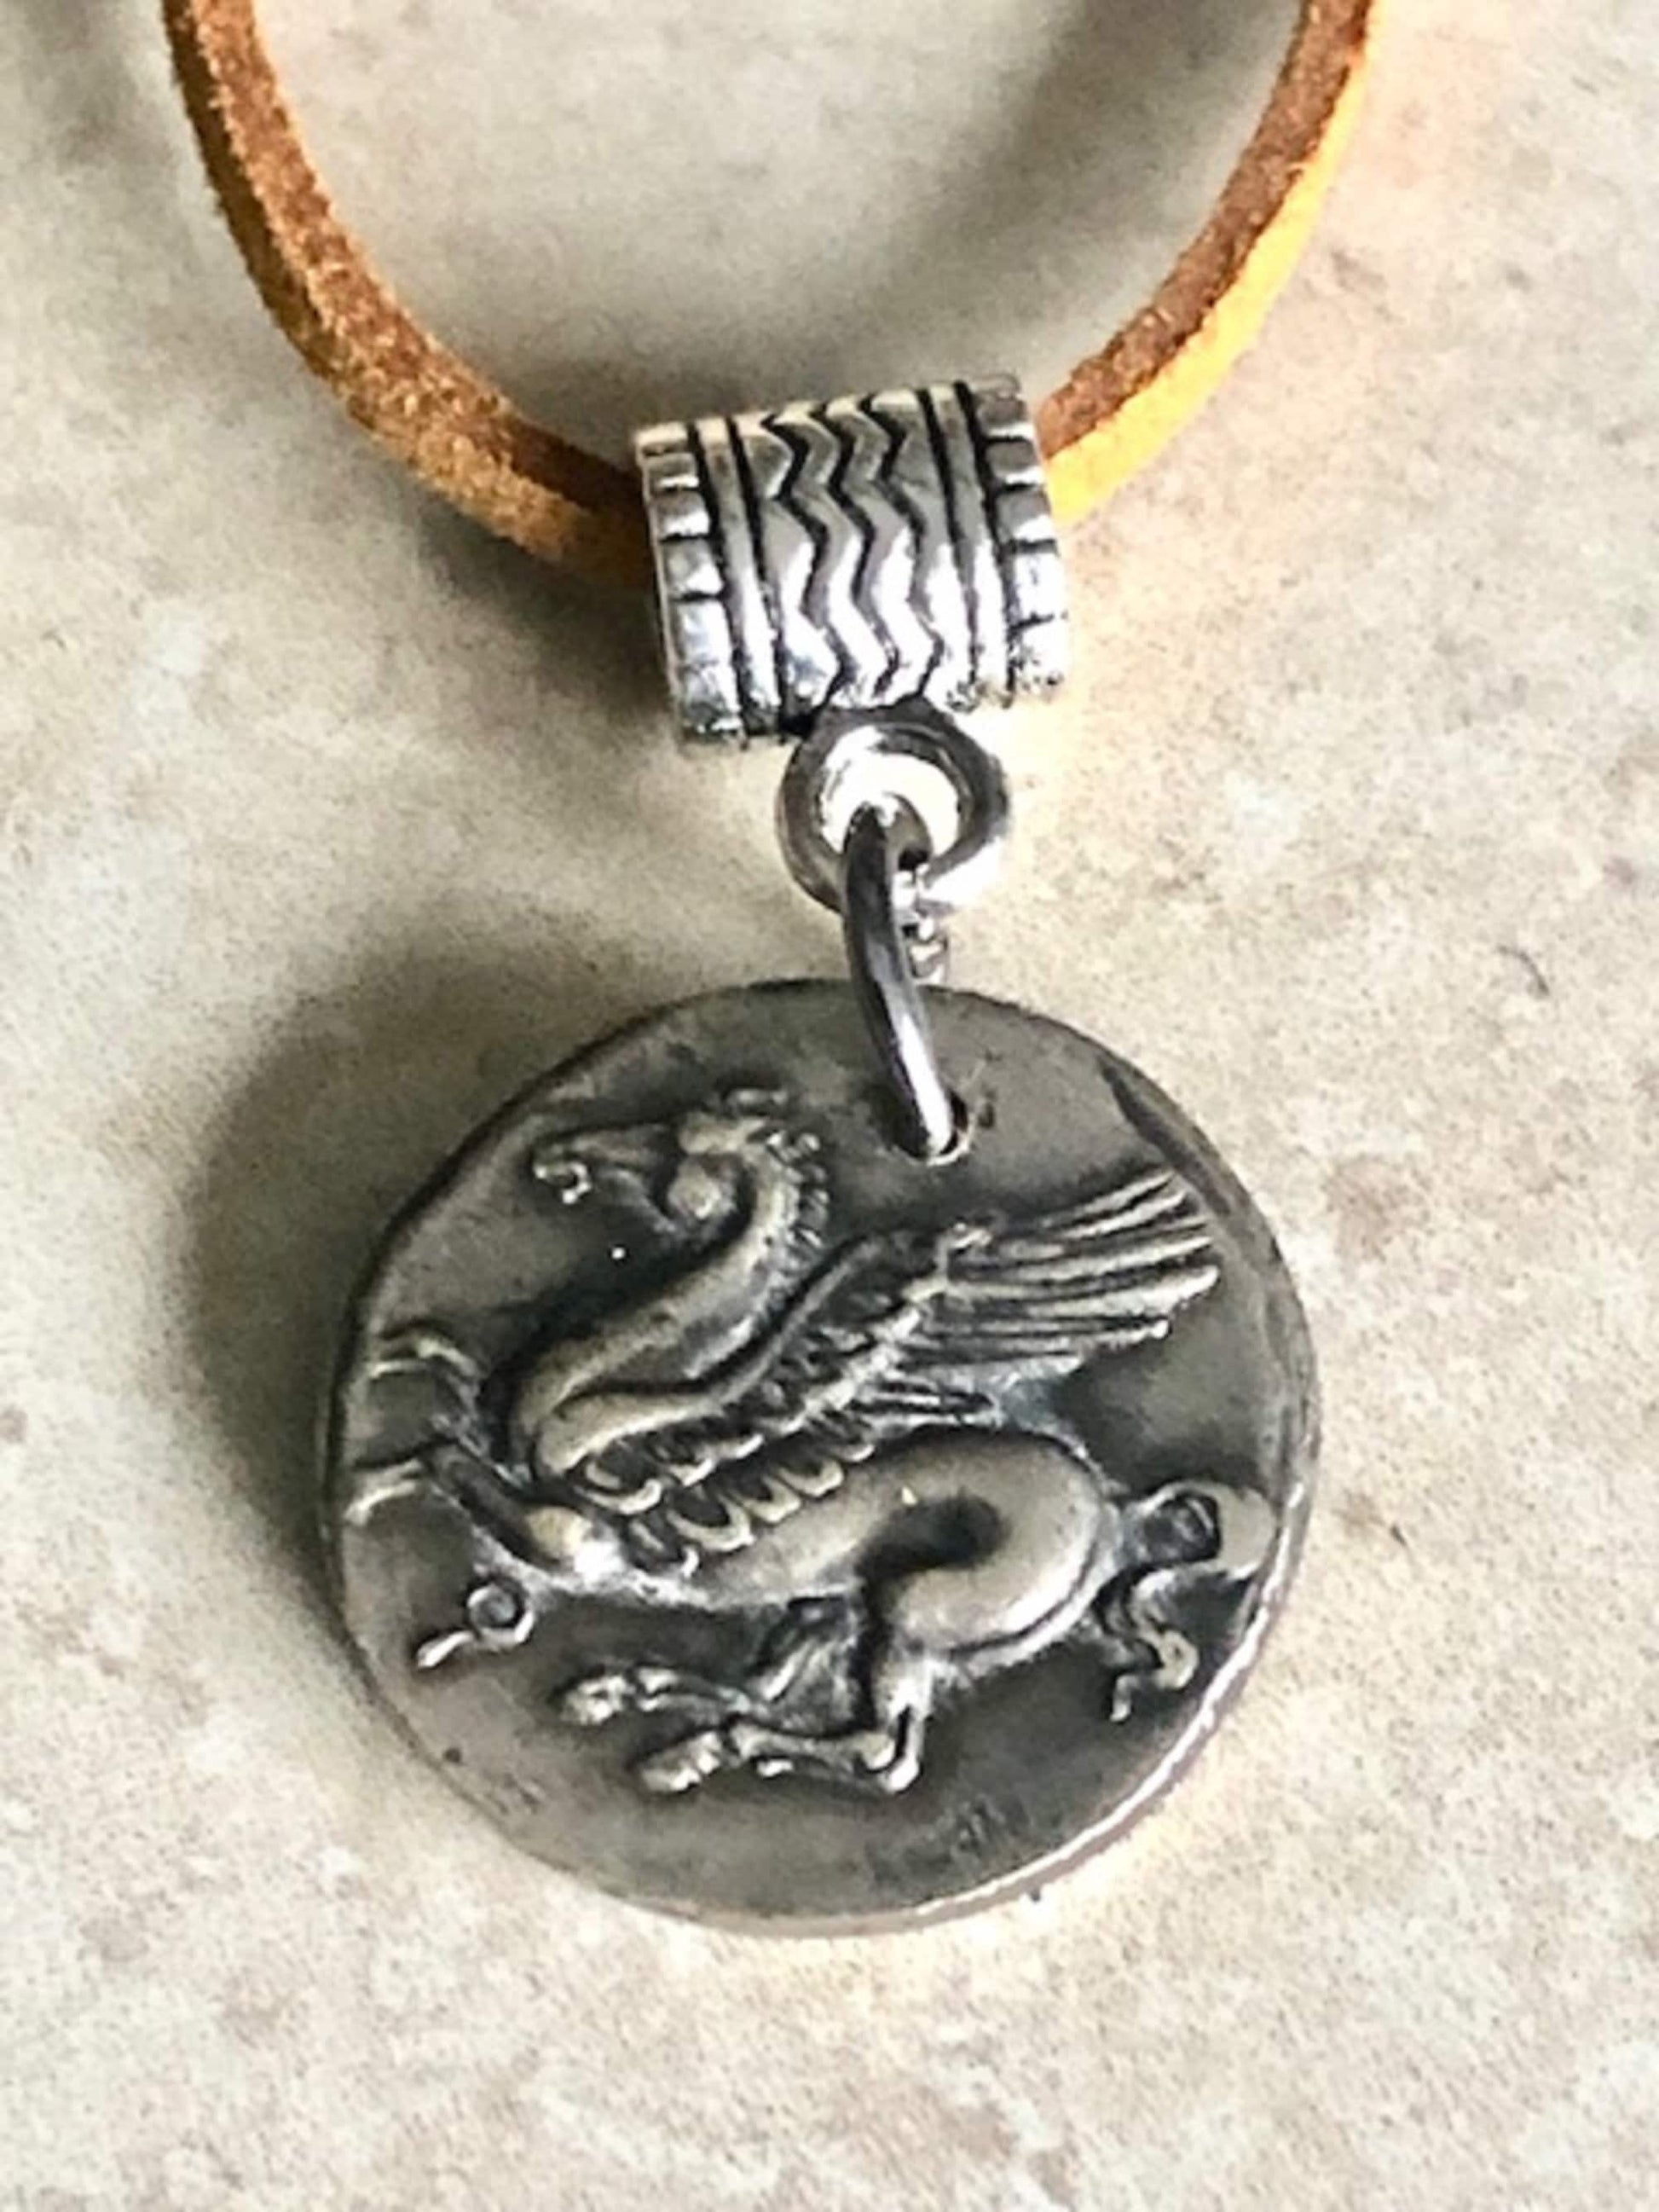 Military Pegasus Ancient Greek Charm Pendant Necklace Mid-Eighteenth-Century Wax Seal Poetry Vision Refinement Handmade